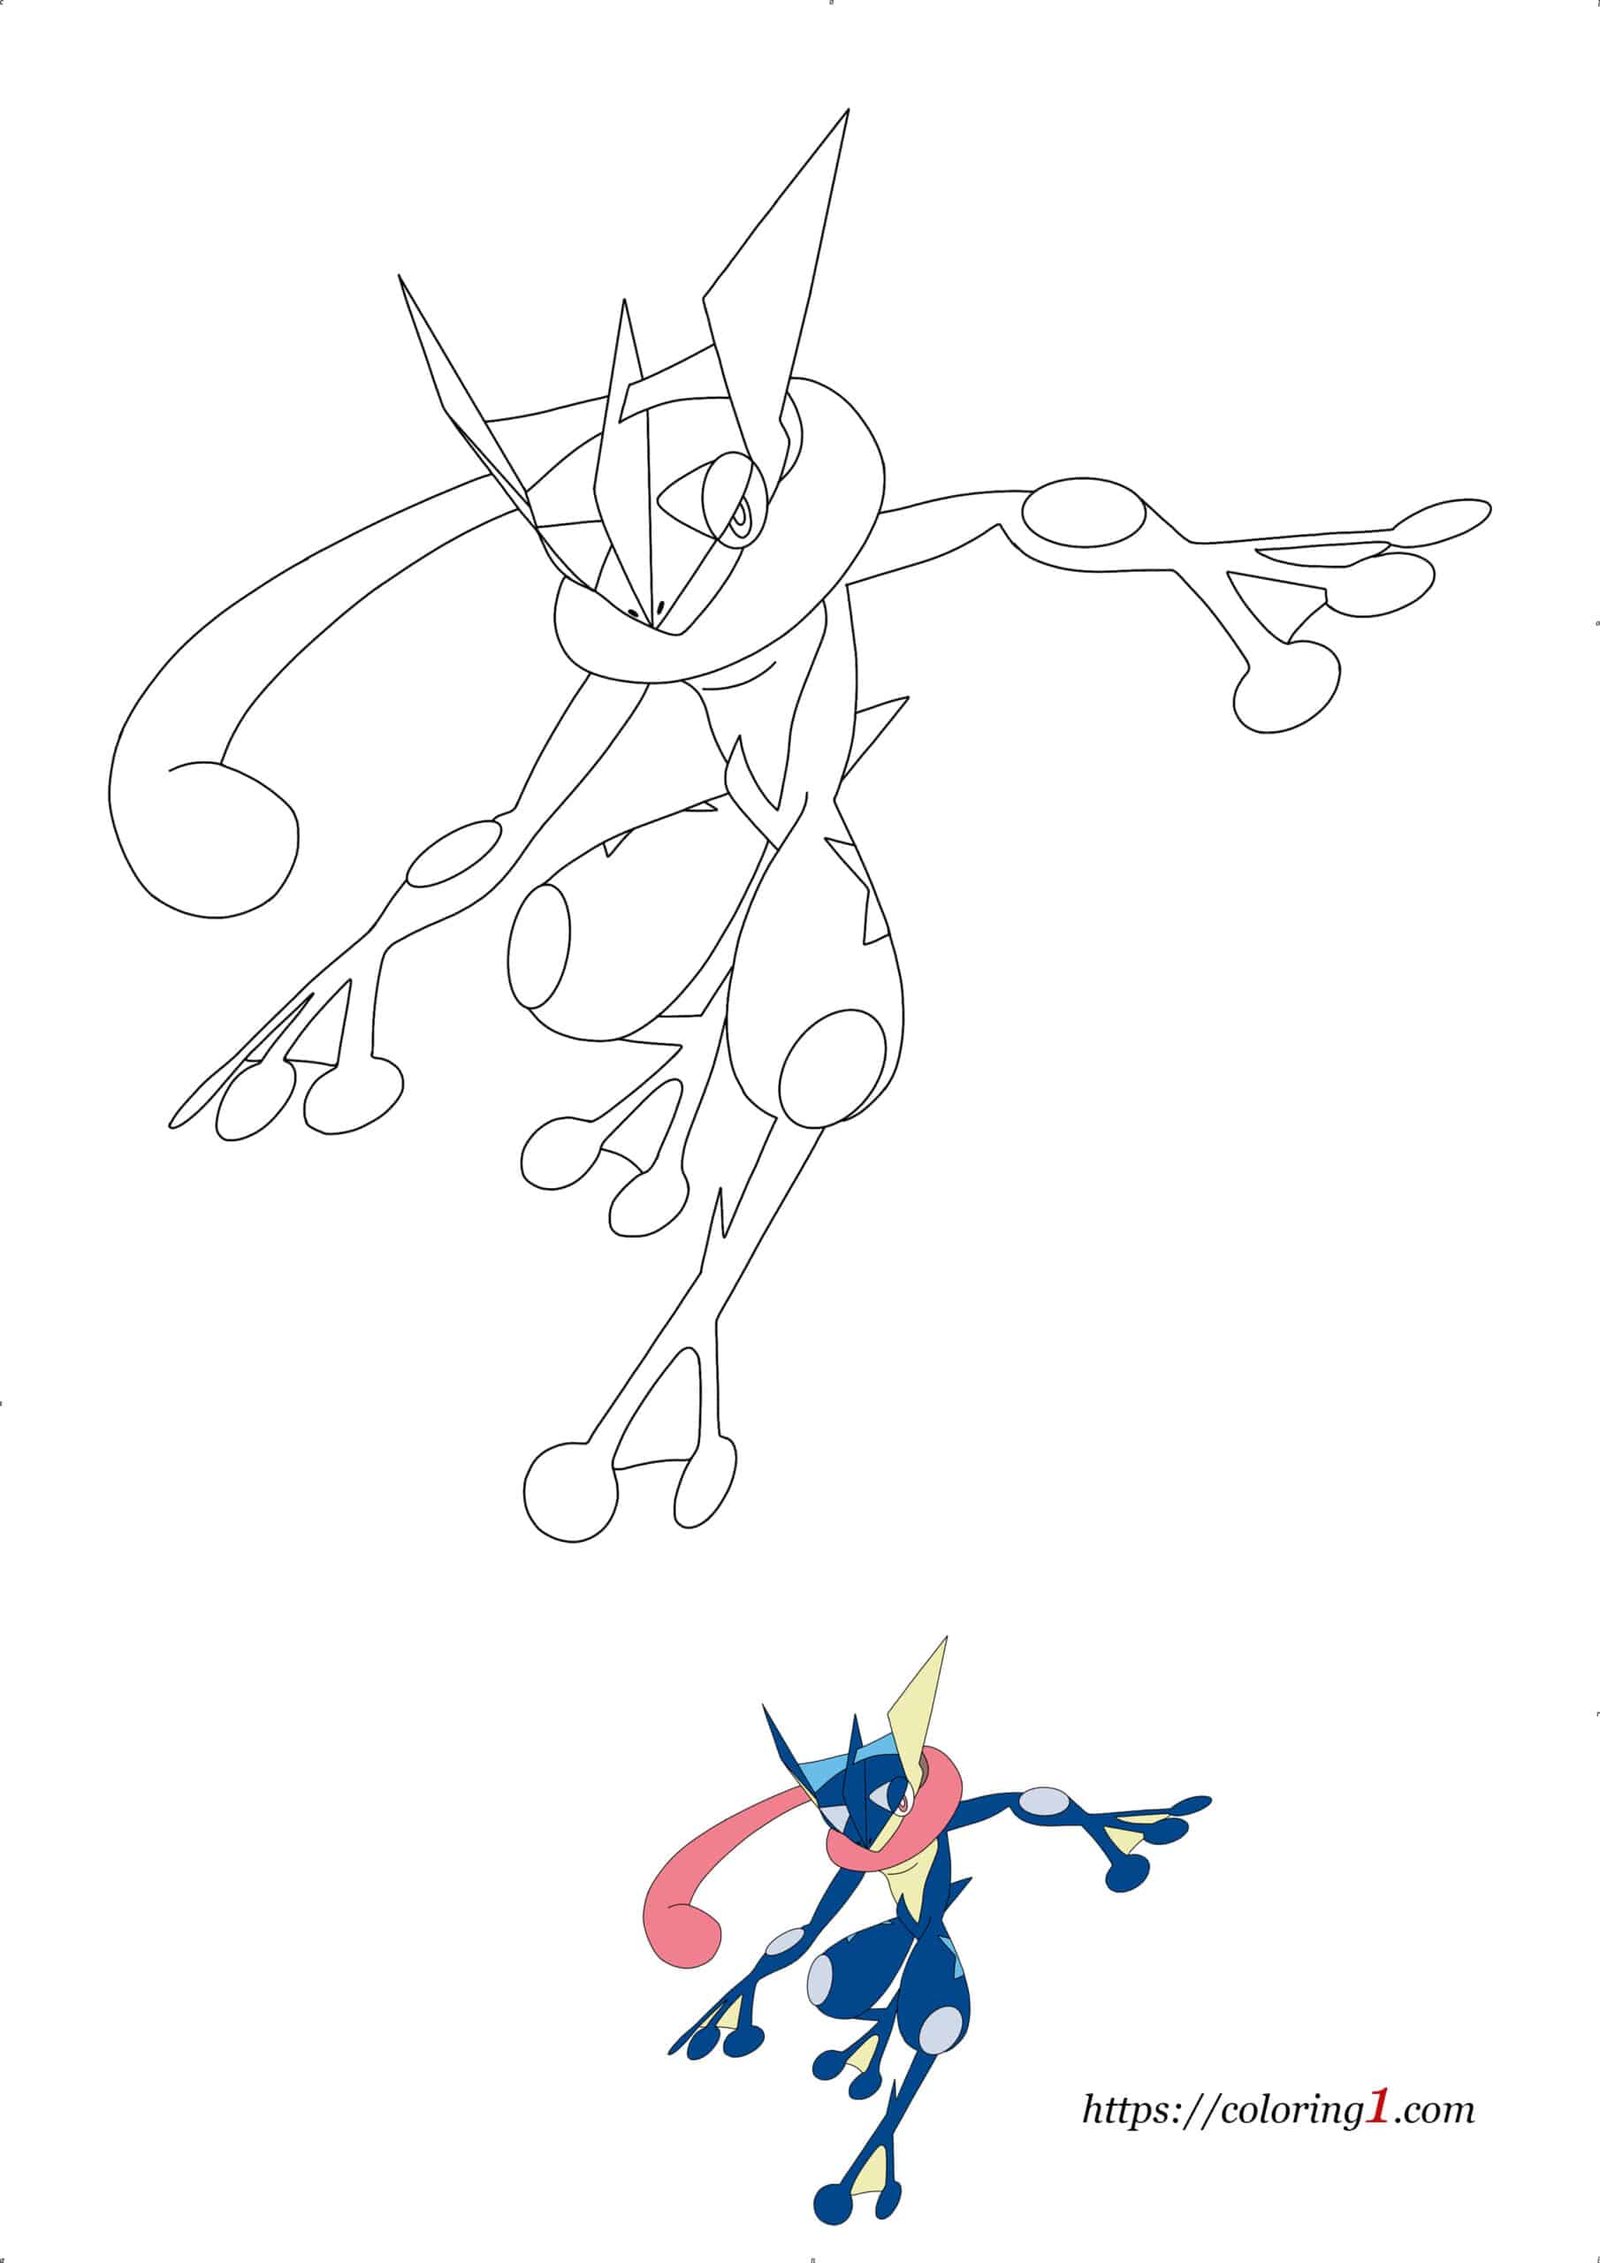 Pokemon Greninja free online coloring page to print for kids